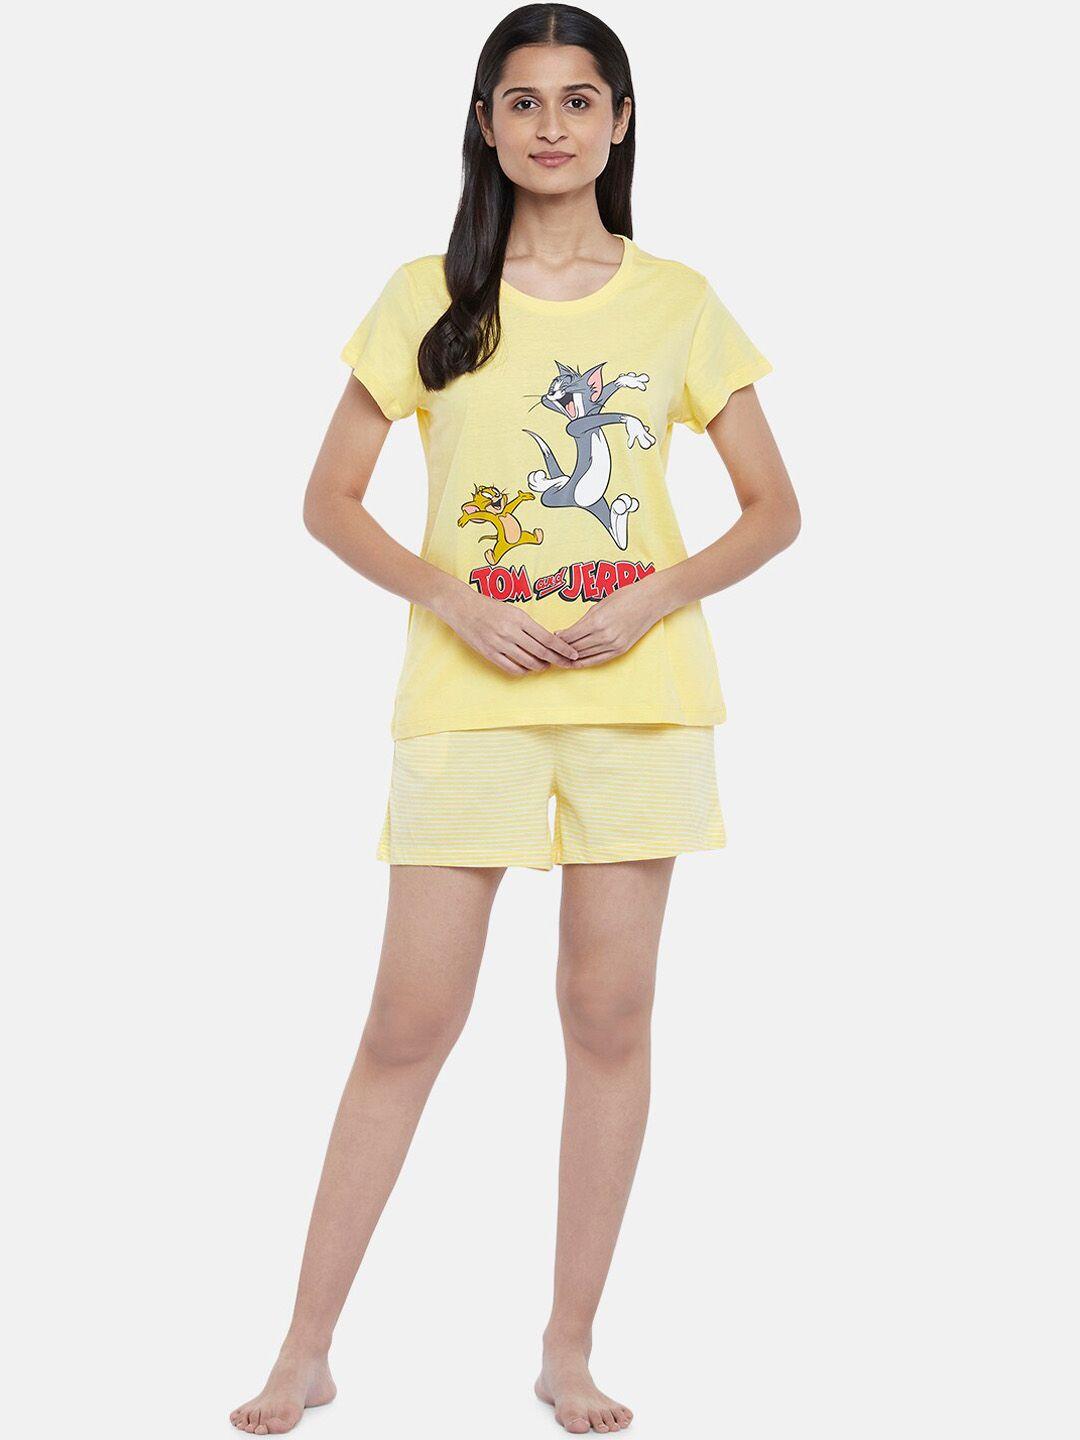 dreamz by pantaloons graphic printed cartoon characters pure cotton night suit